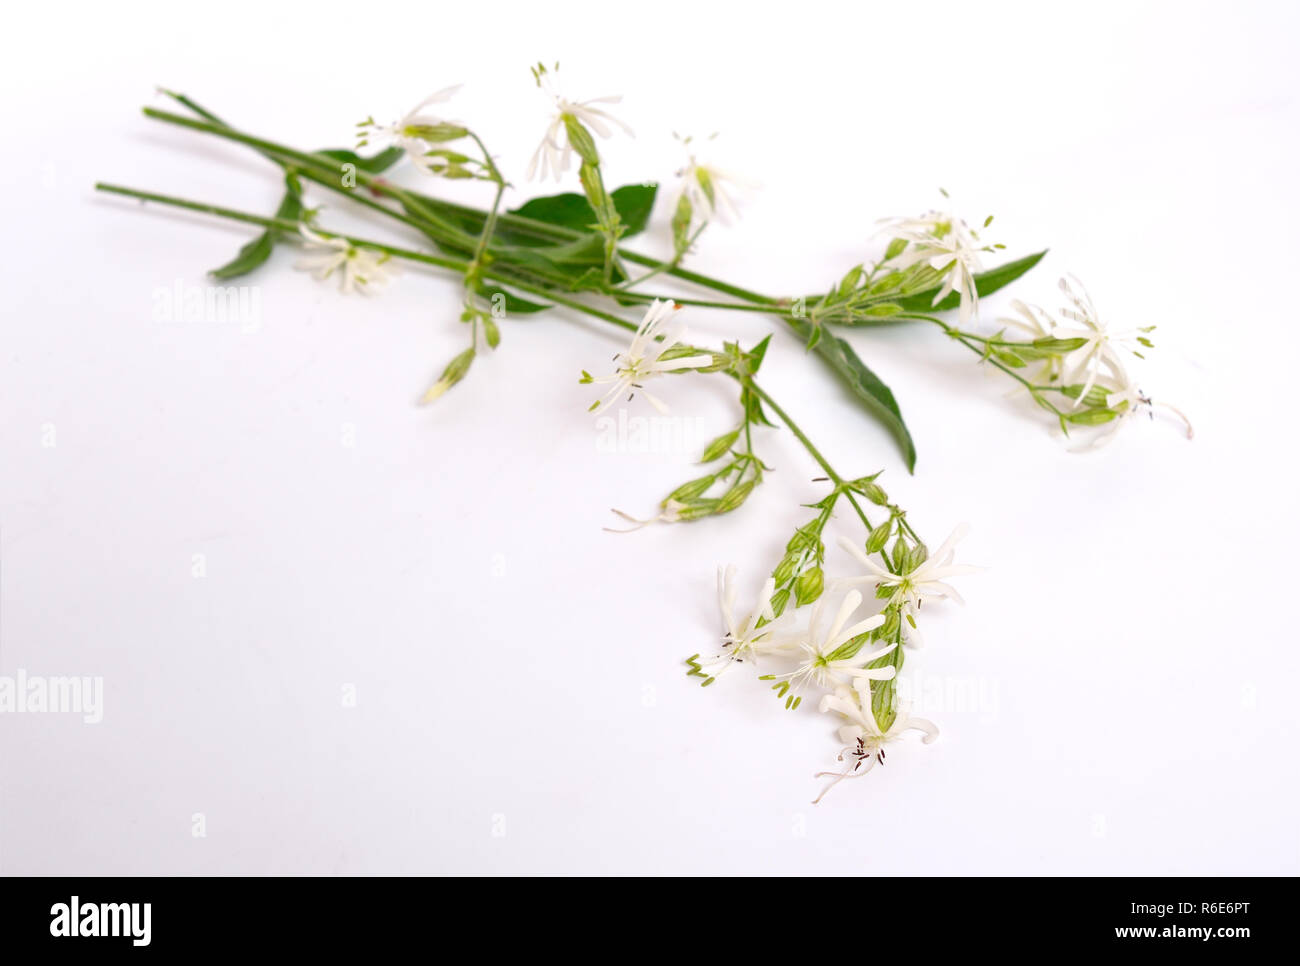 Silene nutans, most commonly known as Nottingham catchfly. On white background. Stock Photo